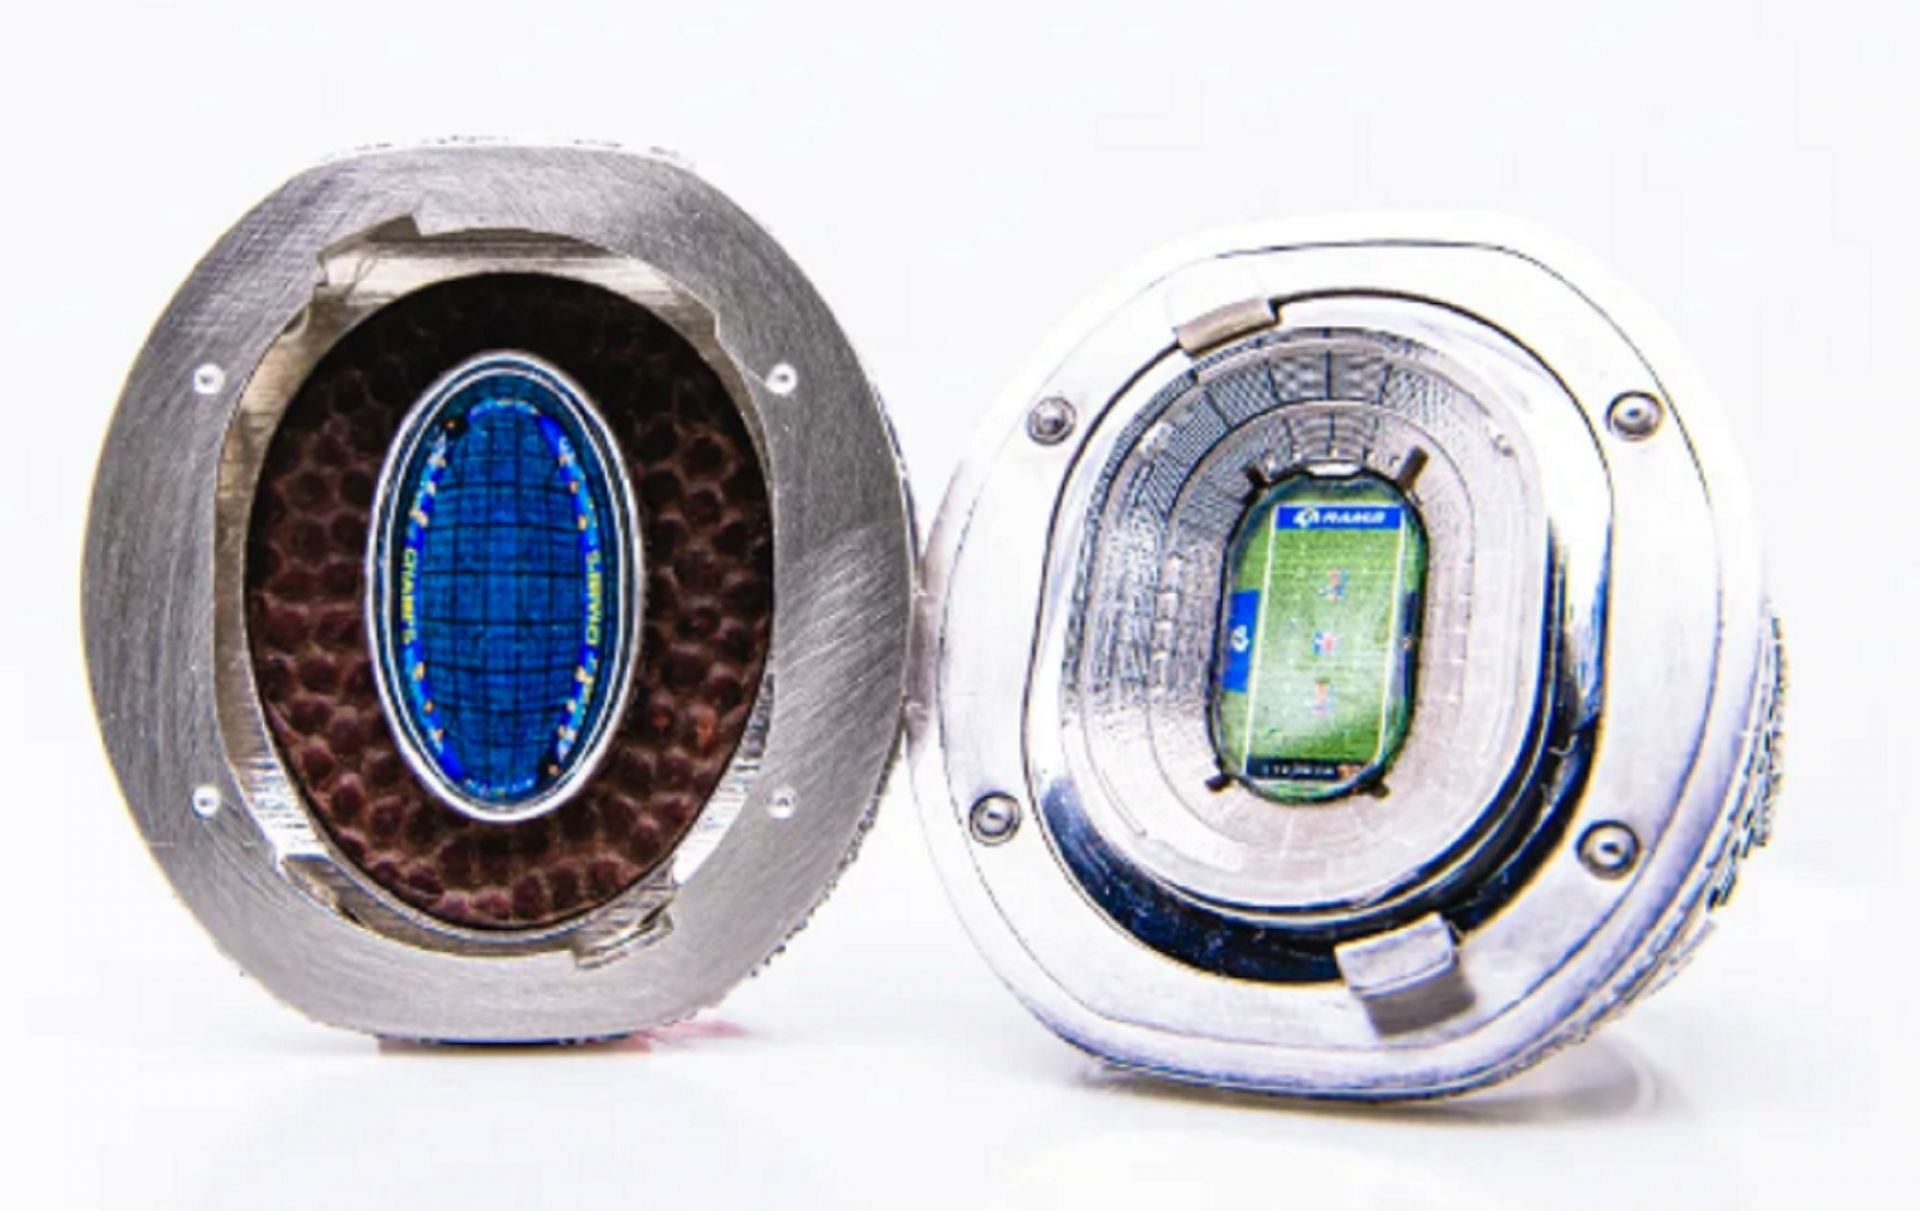 Champion ring inside view- Credit: therams.com